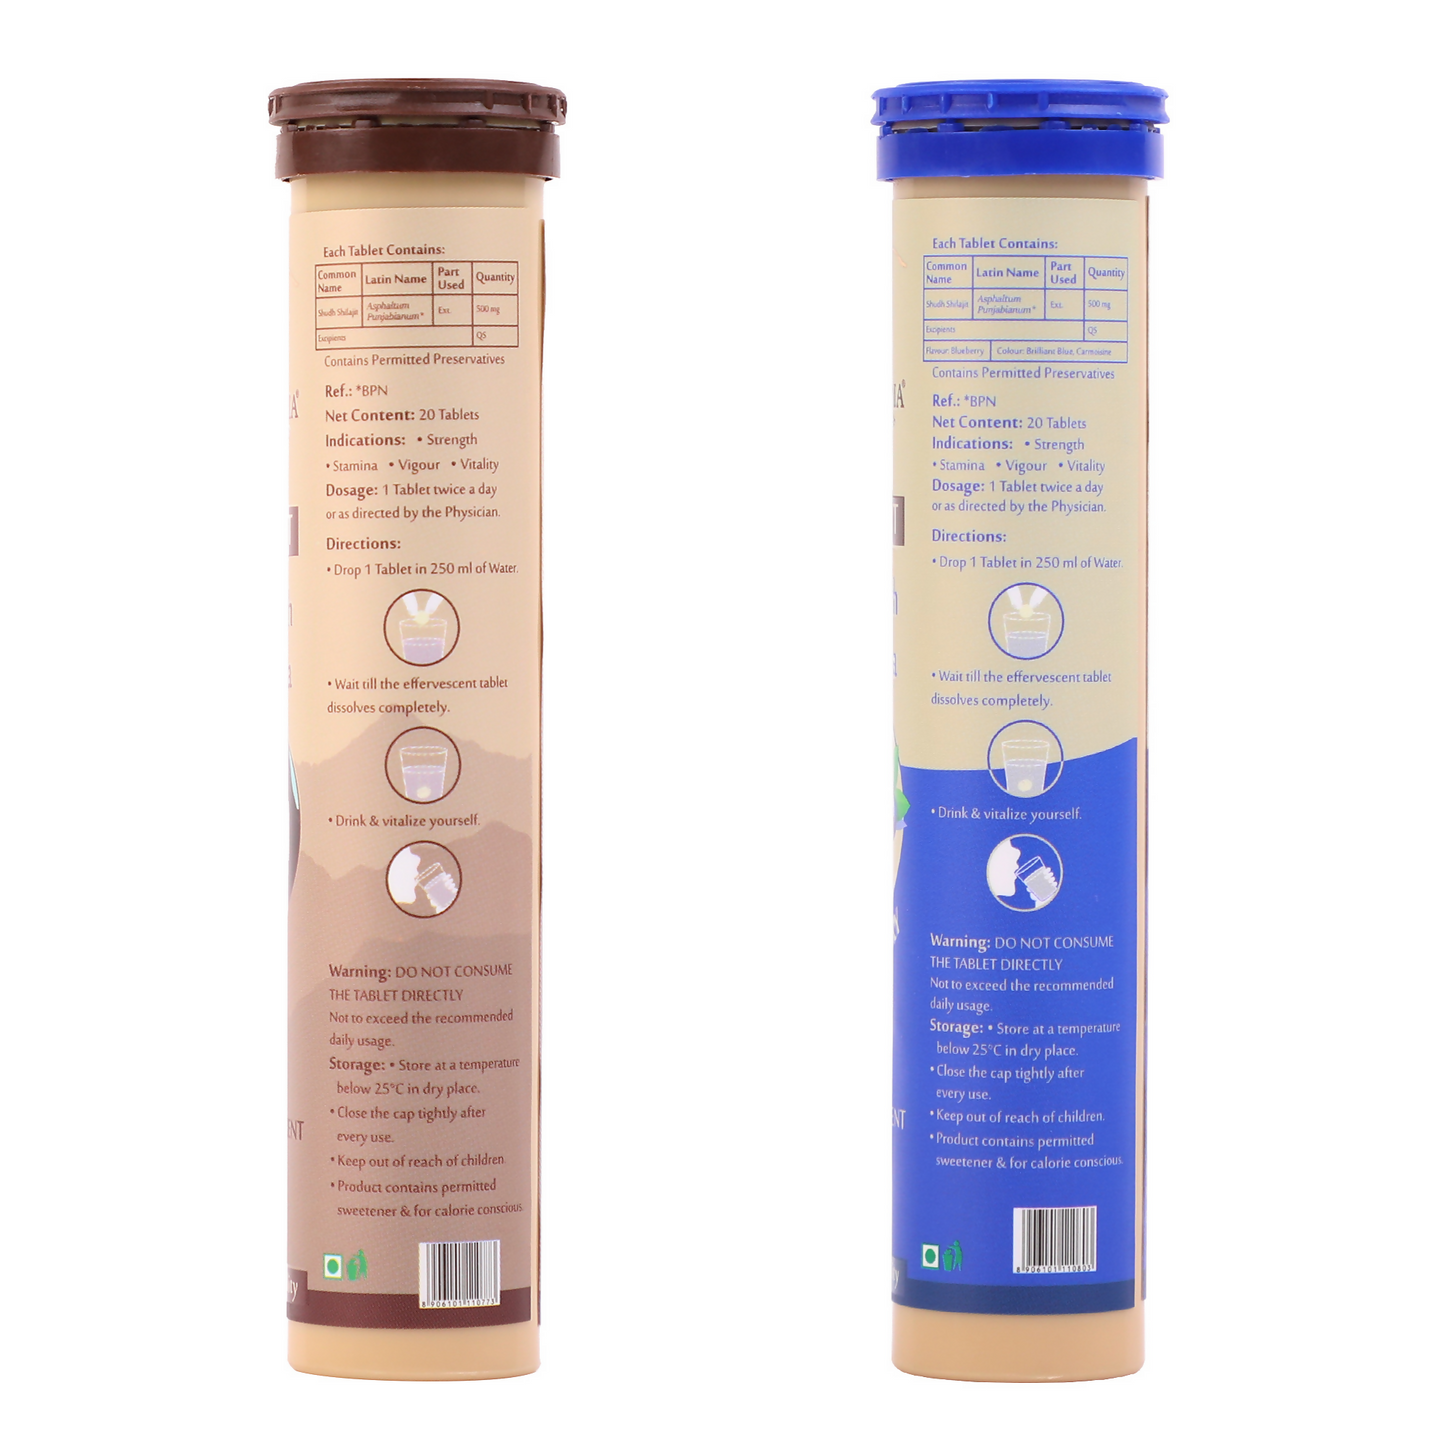 Upakarma Ayurveda Pure SJ Effervescent Tablets in 2 Unique Flavors (Pure SJ & Blueberry) Combo